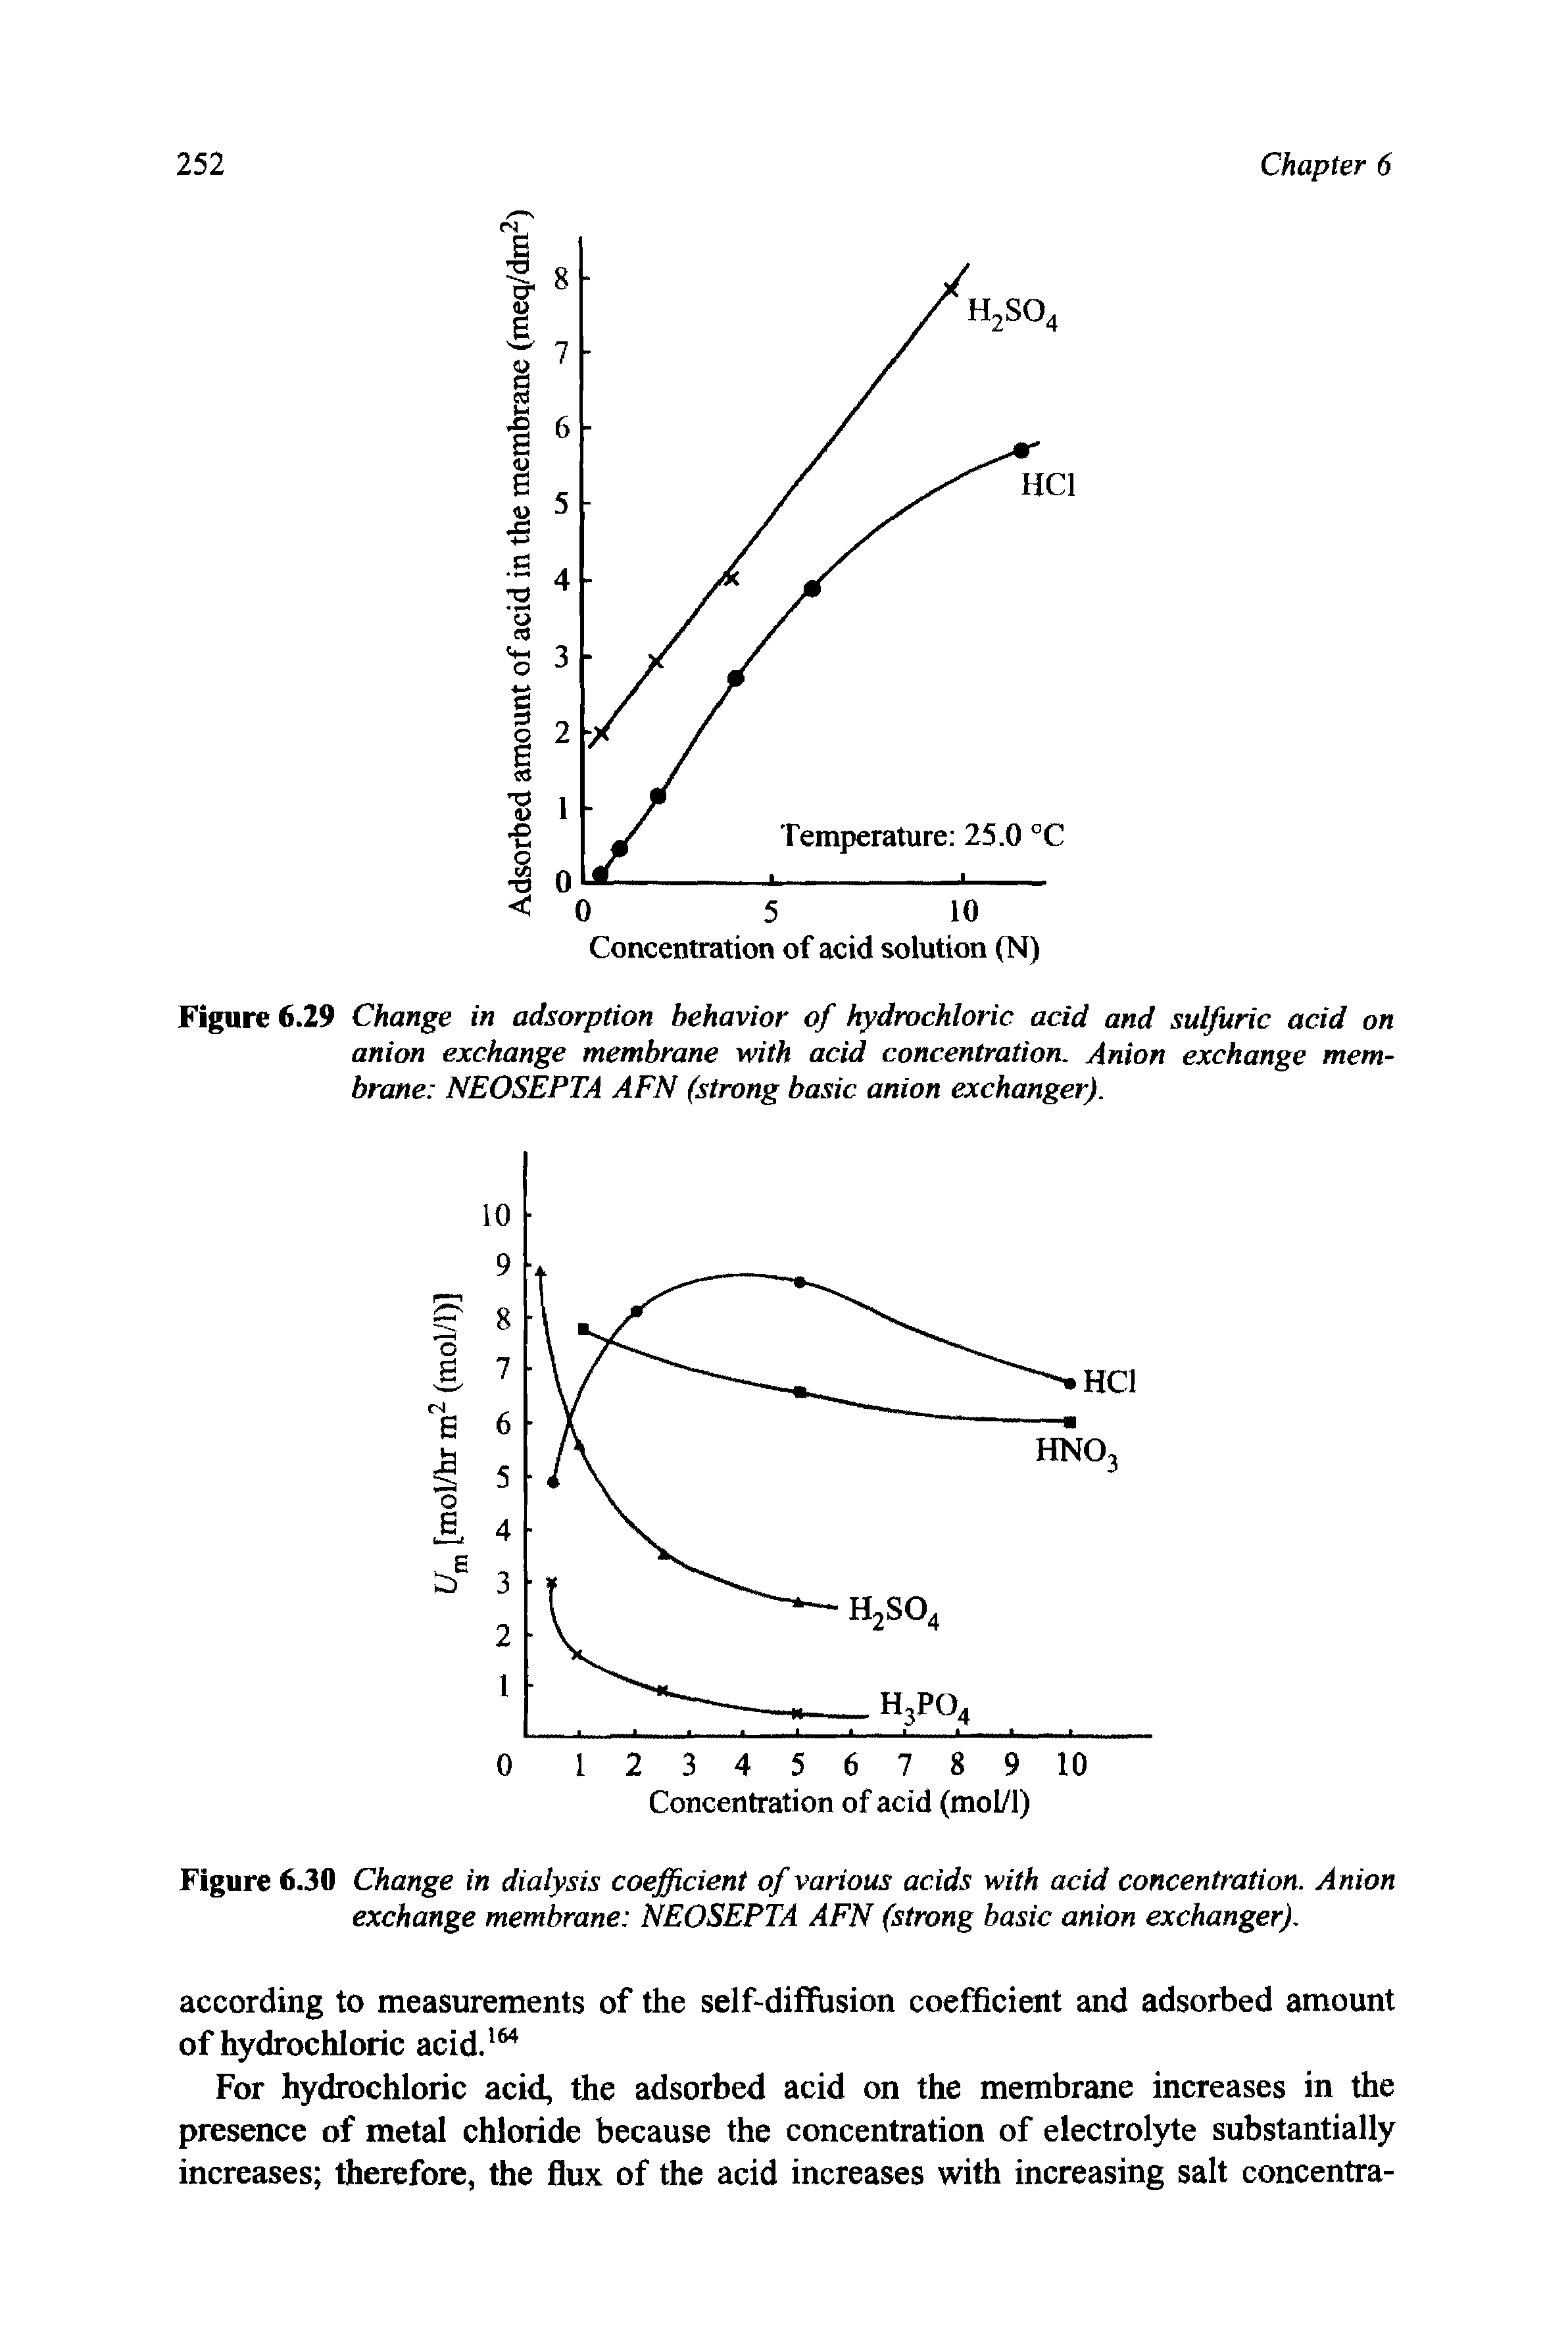 Figure 6.30 Change in dialysis coefficient of various acids with acid concentration. Anion exchange membrane NEOSEPTA AFN (strong basic anion exchanger).